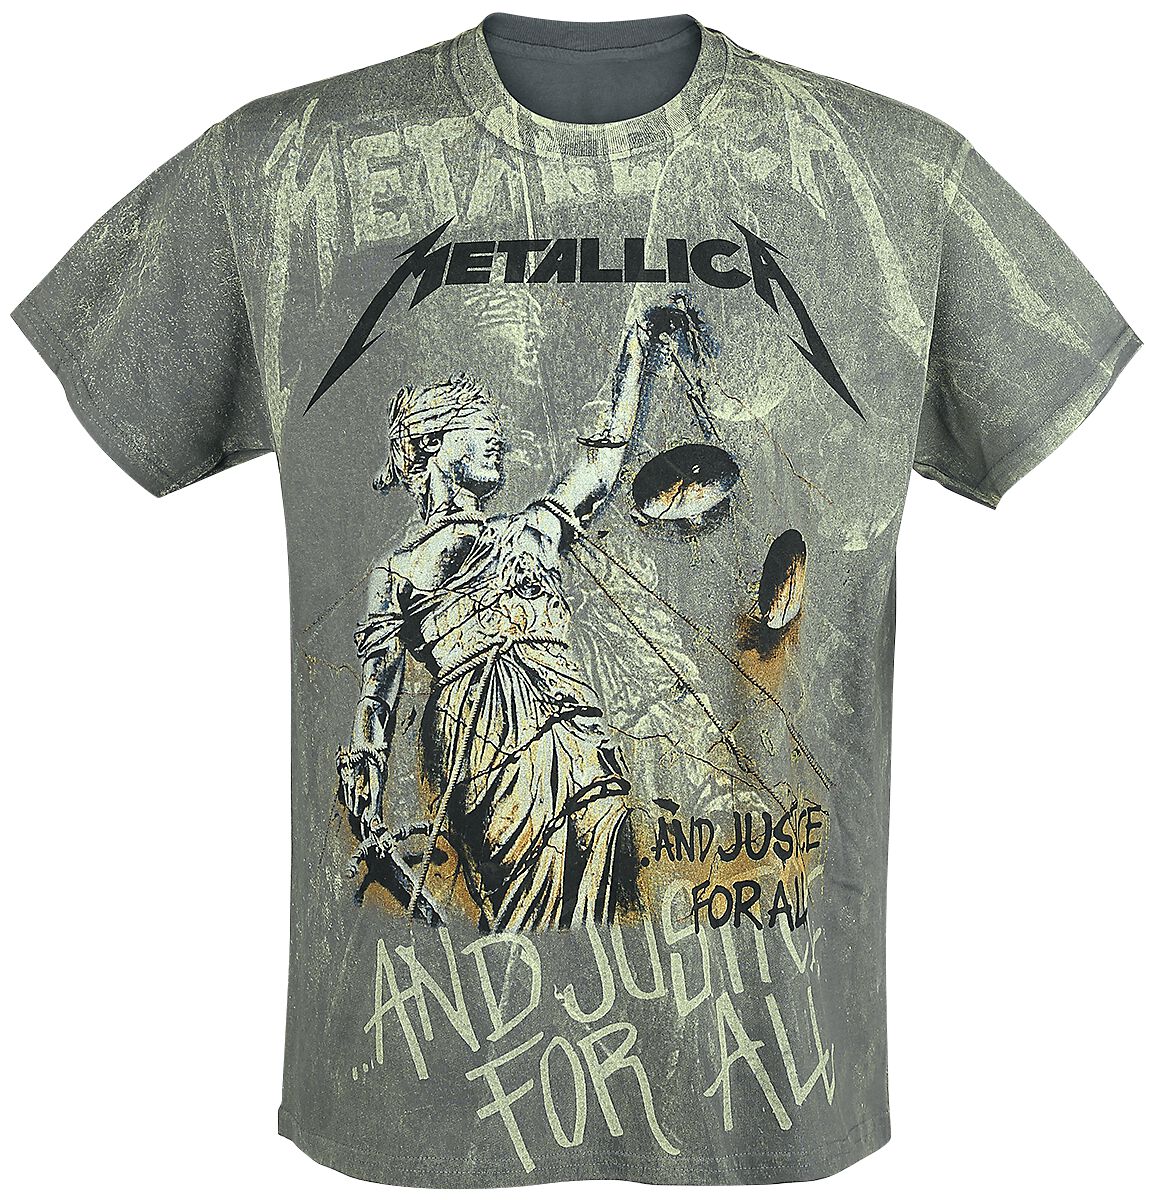 Metallica Justice for All T-Shirt